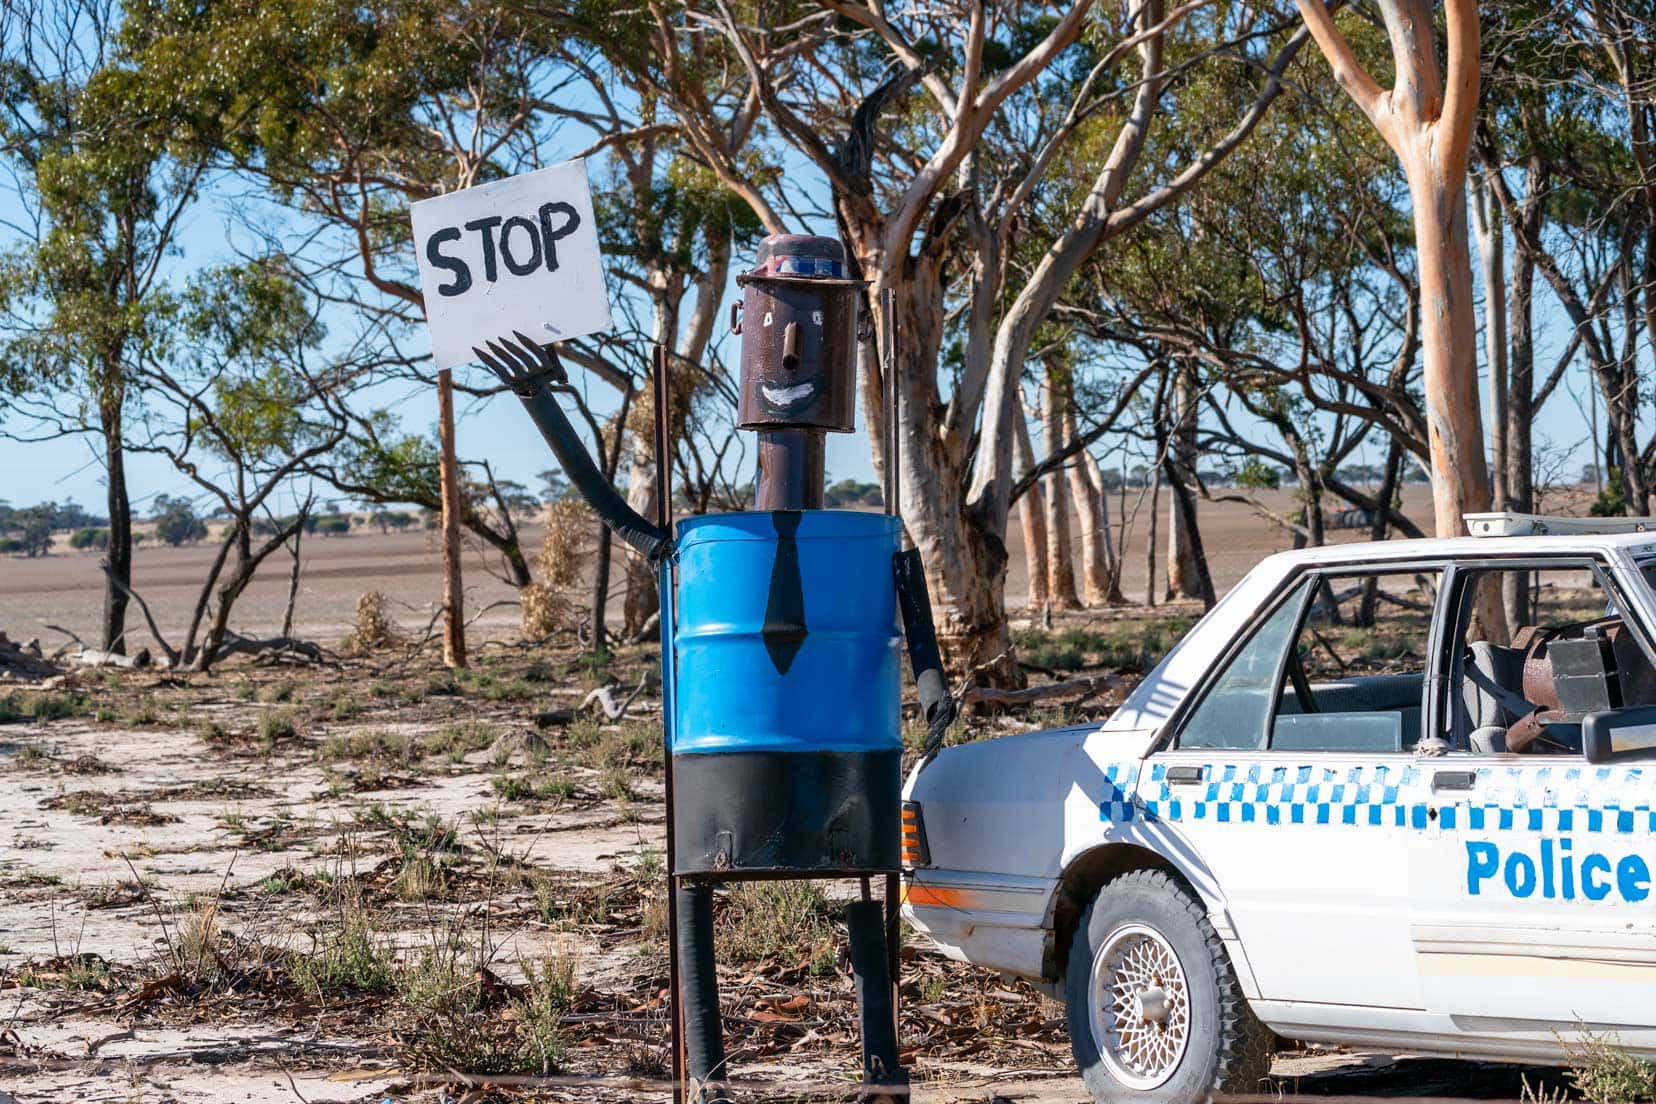 Policeman tin horse holding a sign that says stop by an old police car